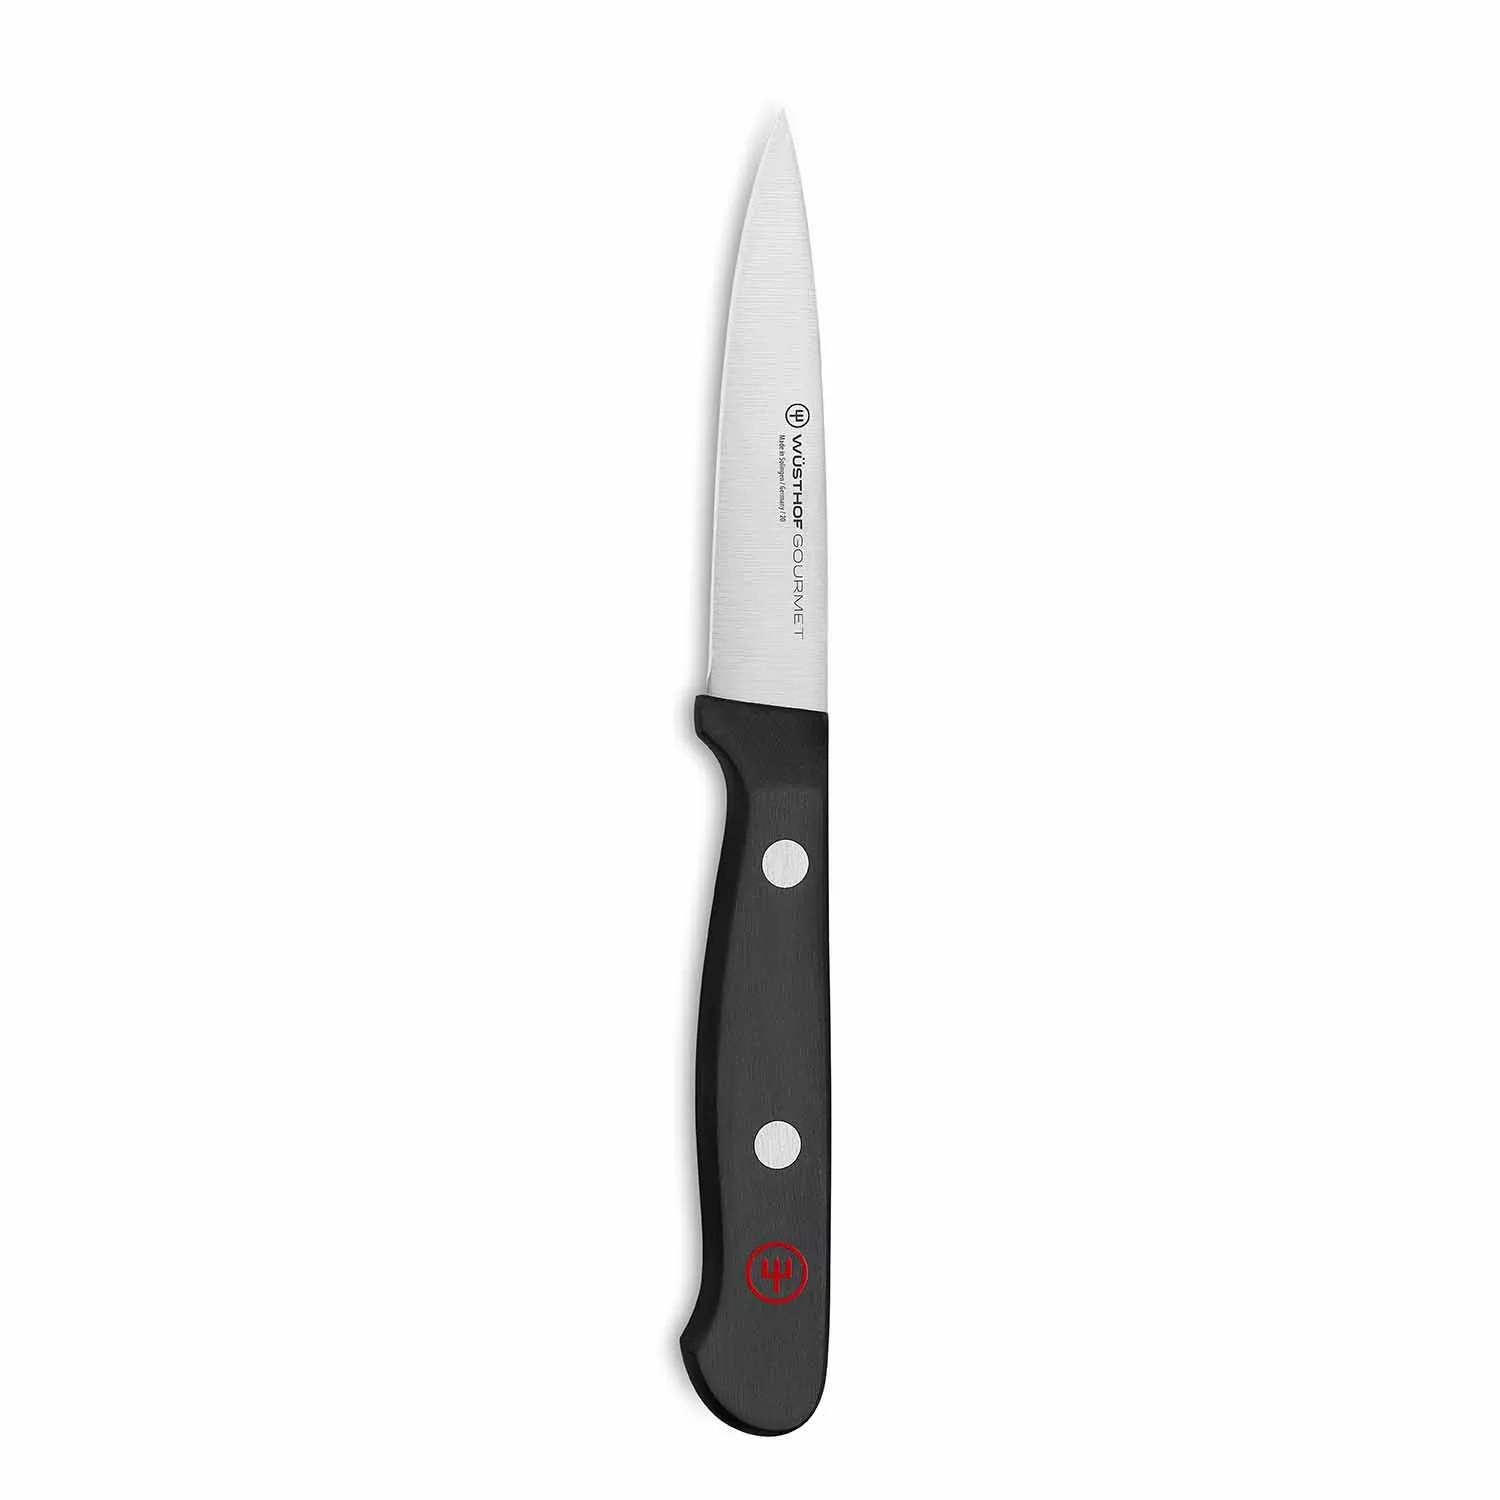 Wusthof Classic Paring Knife, One Size, Black, Stainless Steel